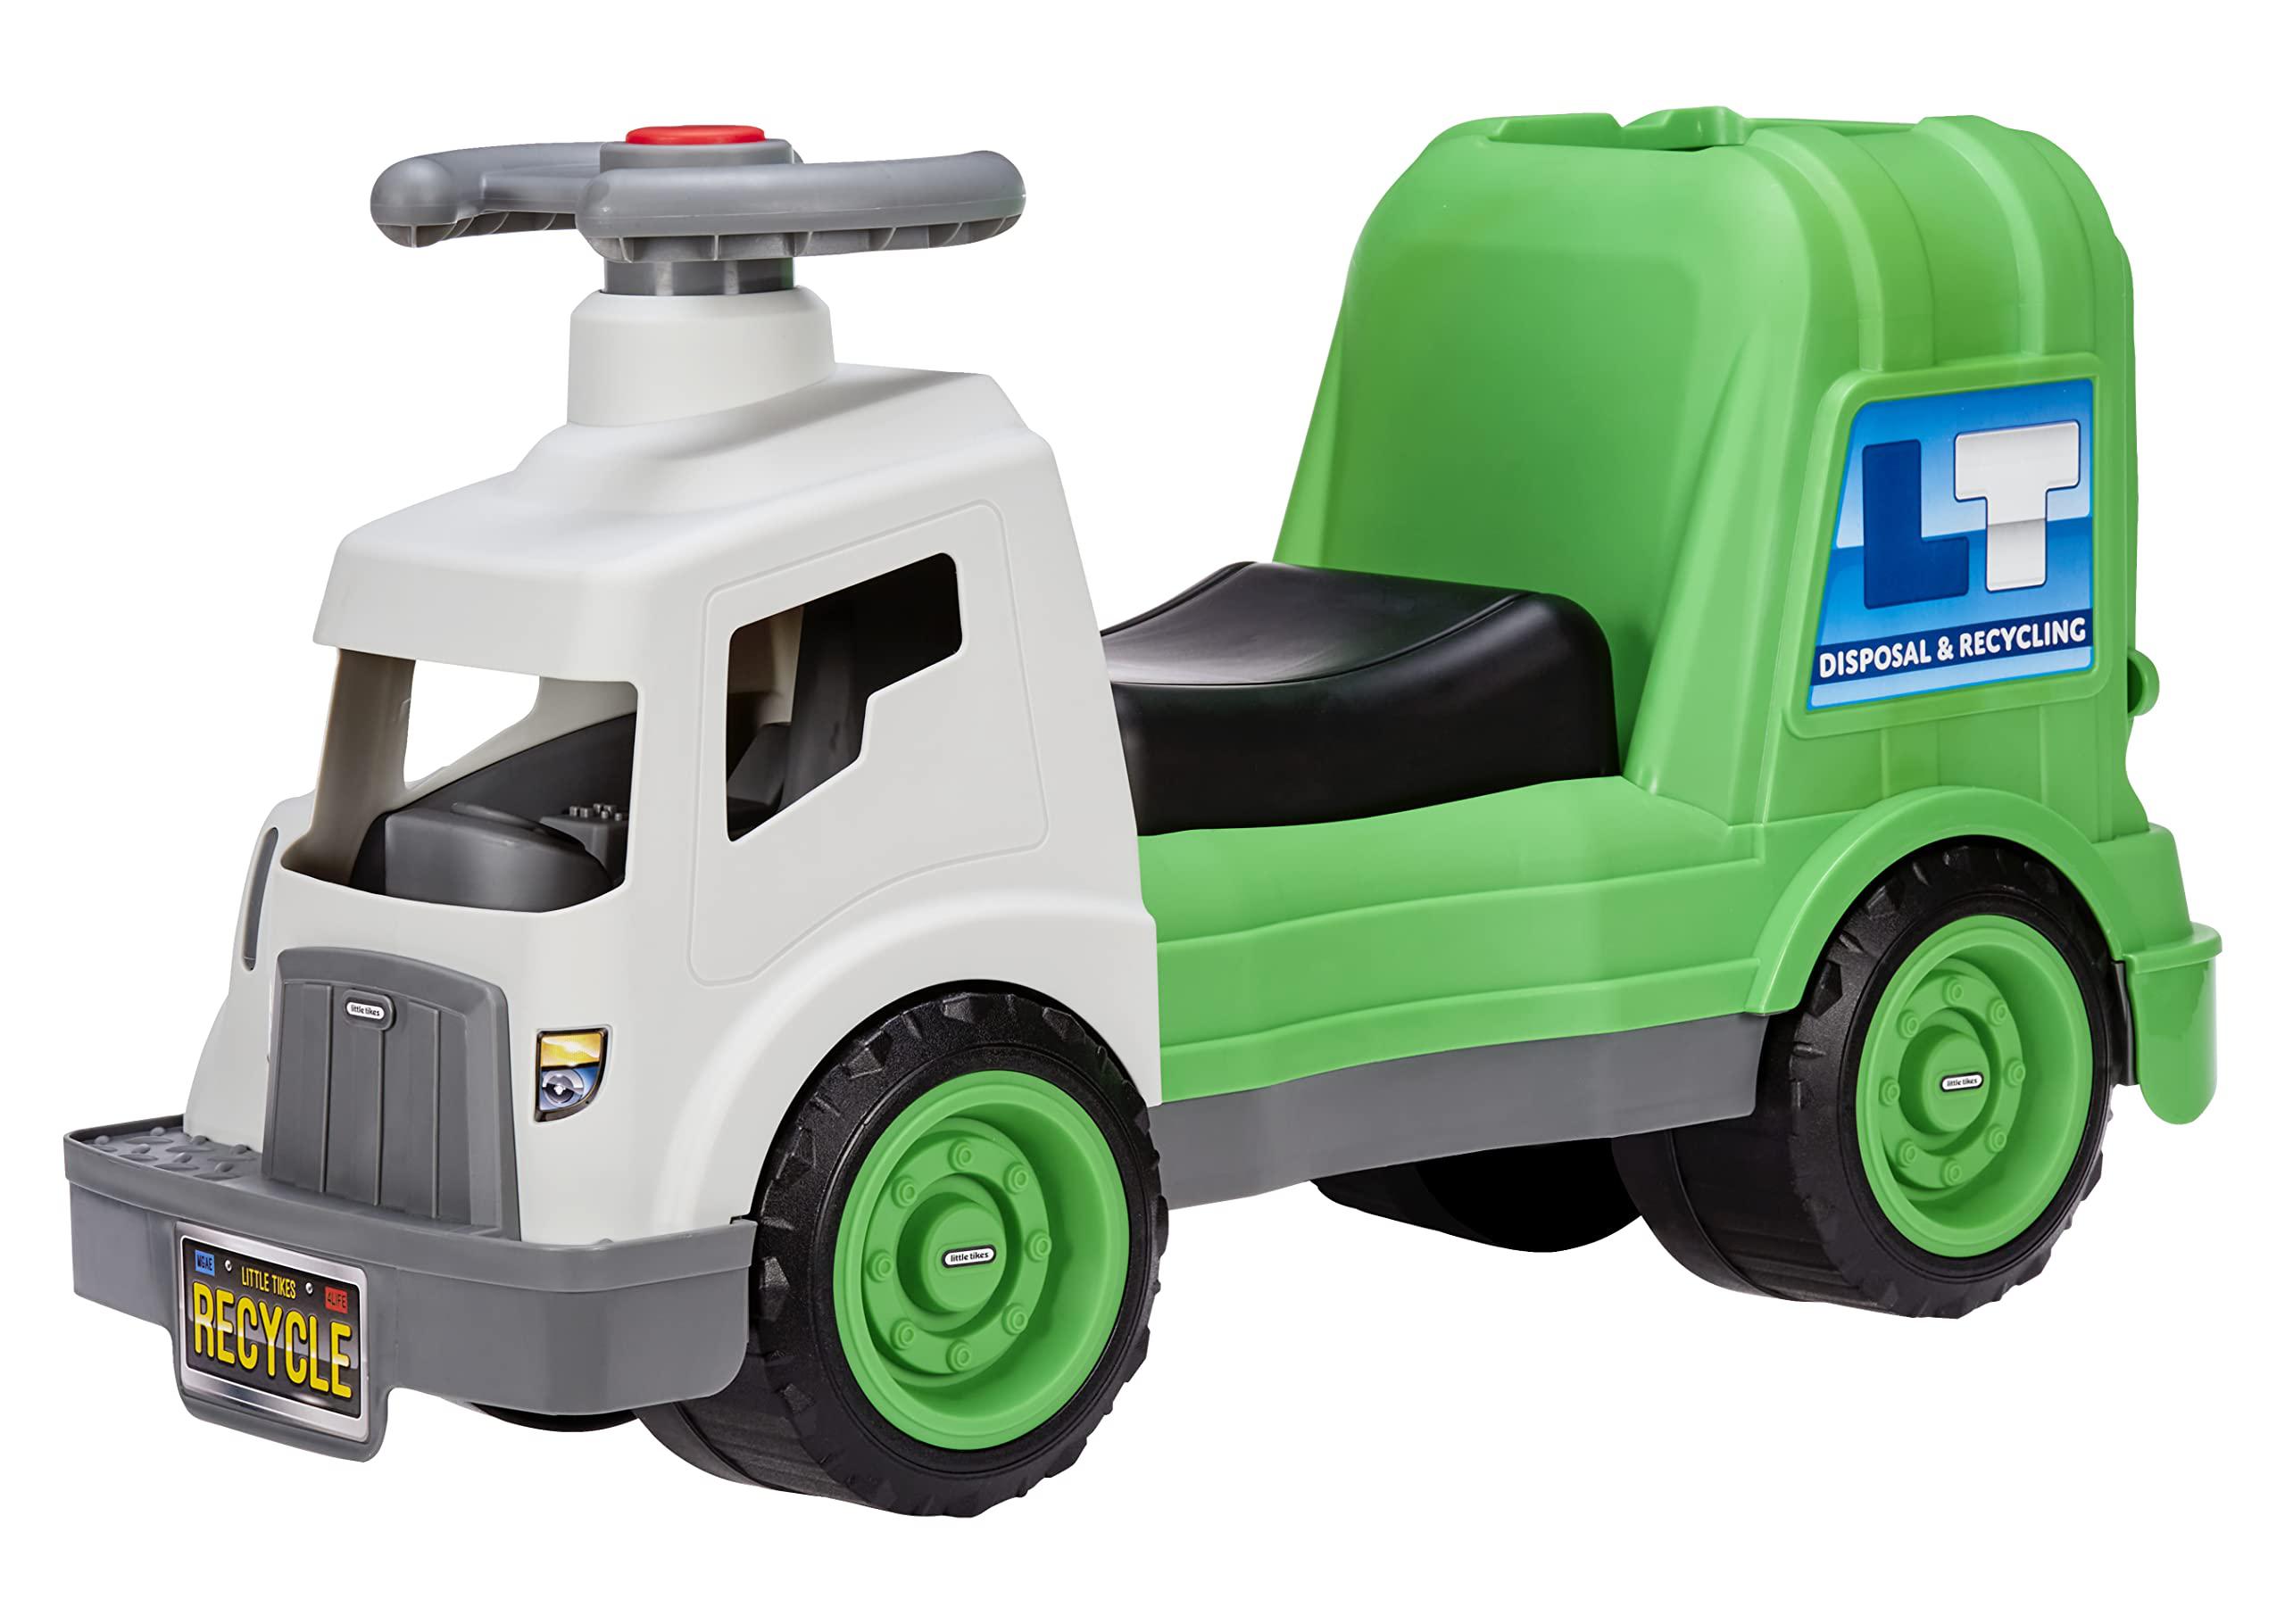 Little Tikes Dirt Diggers Garbage Truck Scoot Ride On with Real Working Horn and Trash Bin for Themed Roleplay for Boys, Girls, 